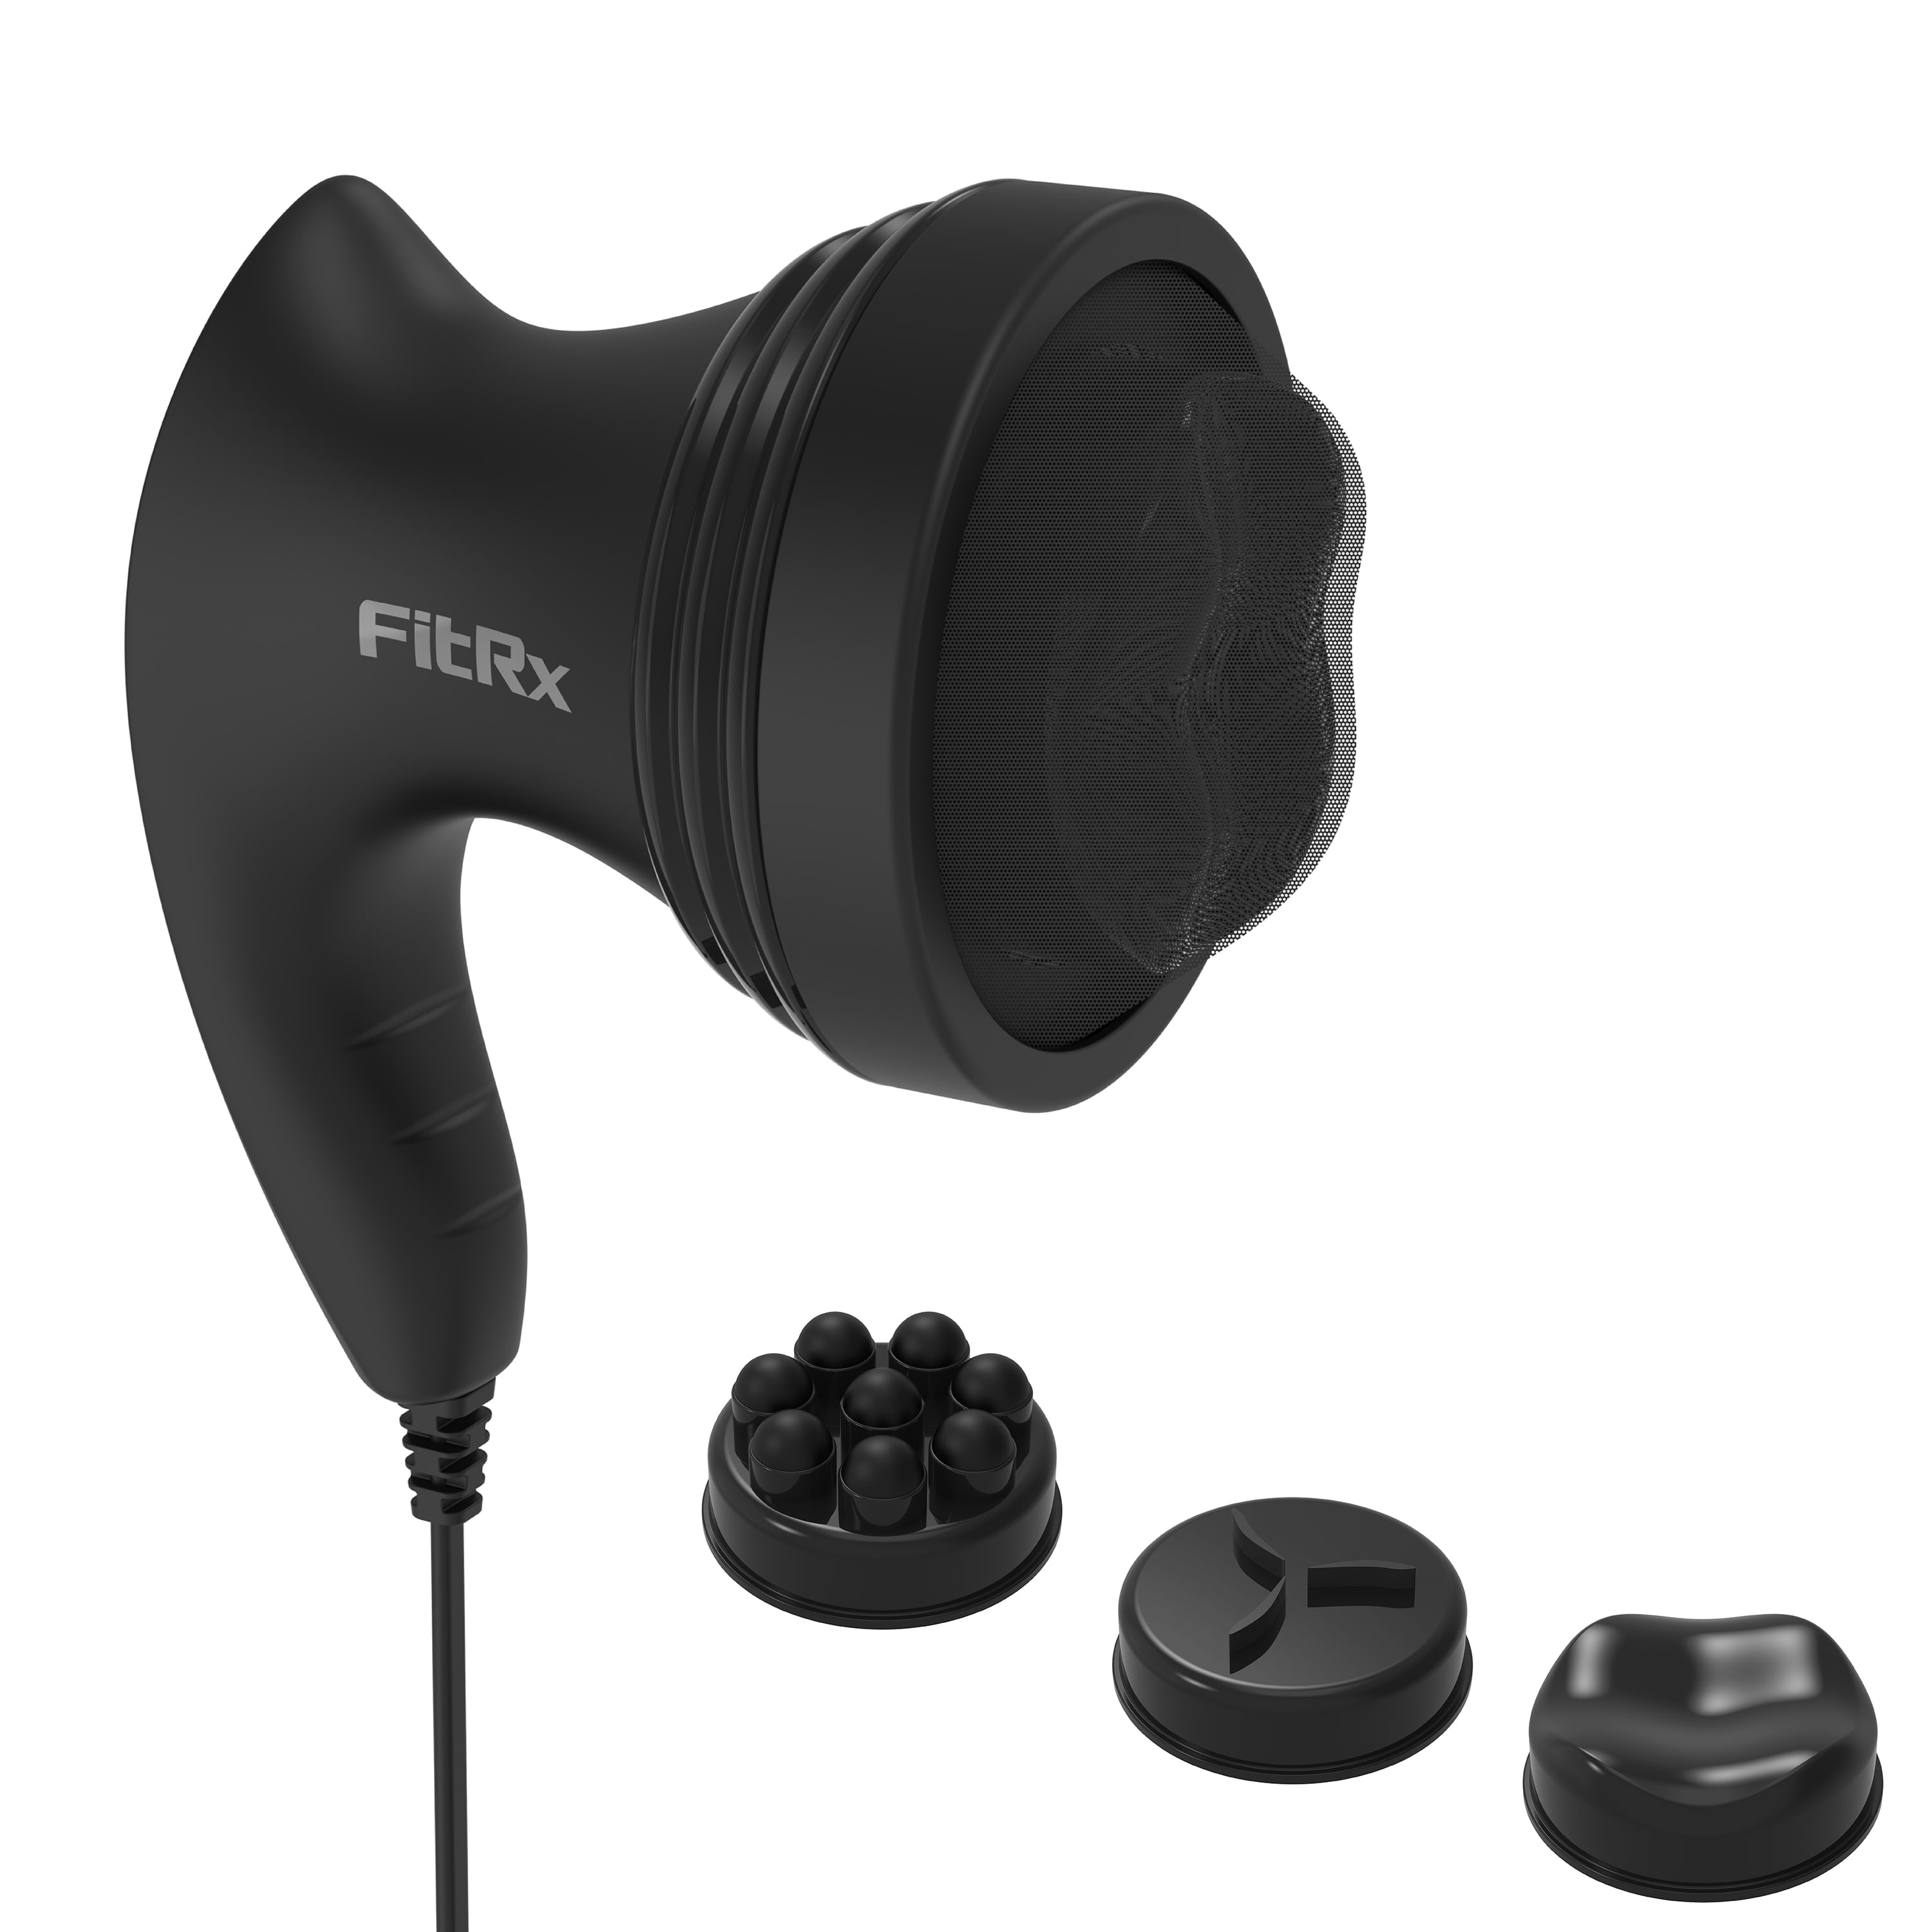 FitRx Handheld Shiatsu Massager with Variable Speed Settings for Back and Neck